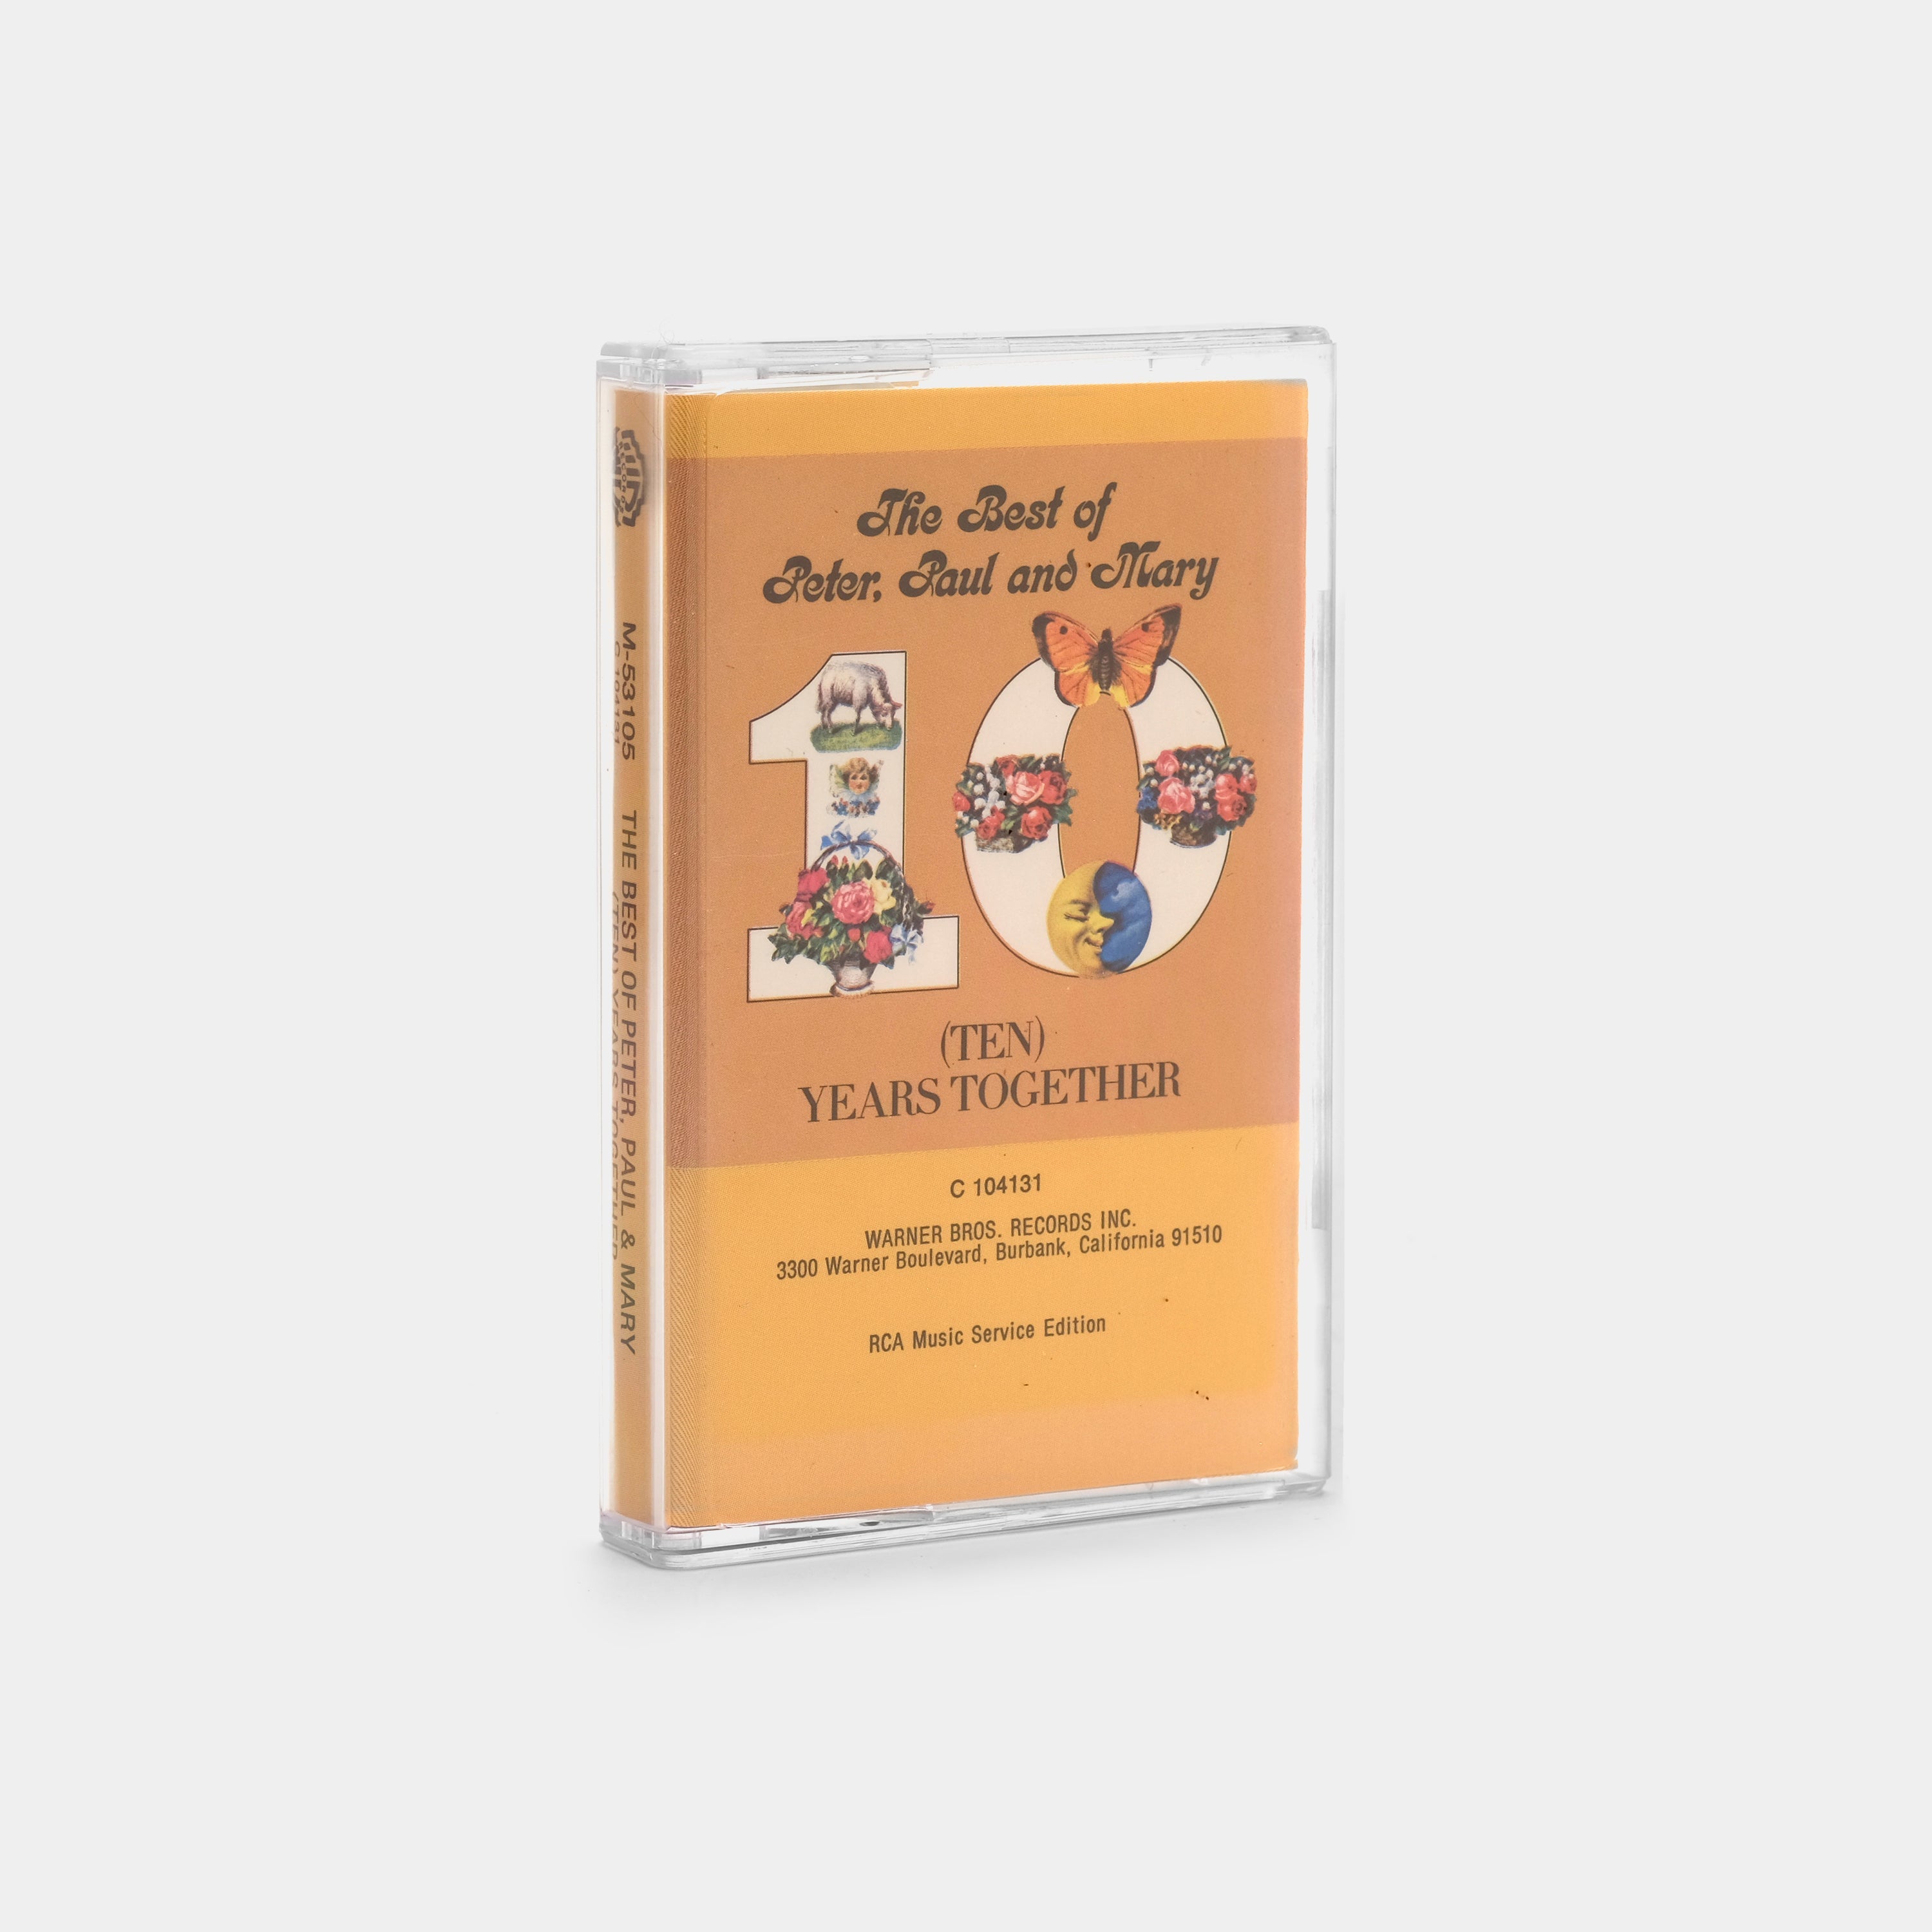 Peter, Paul & Mary - 10 Years Together: The Best of Peter, Paul & Mary Cassette Tape